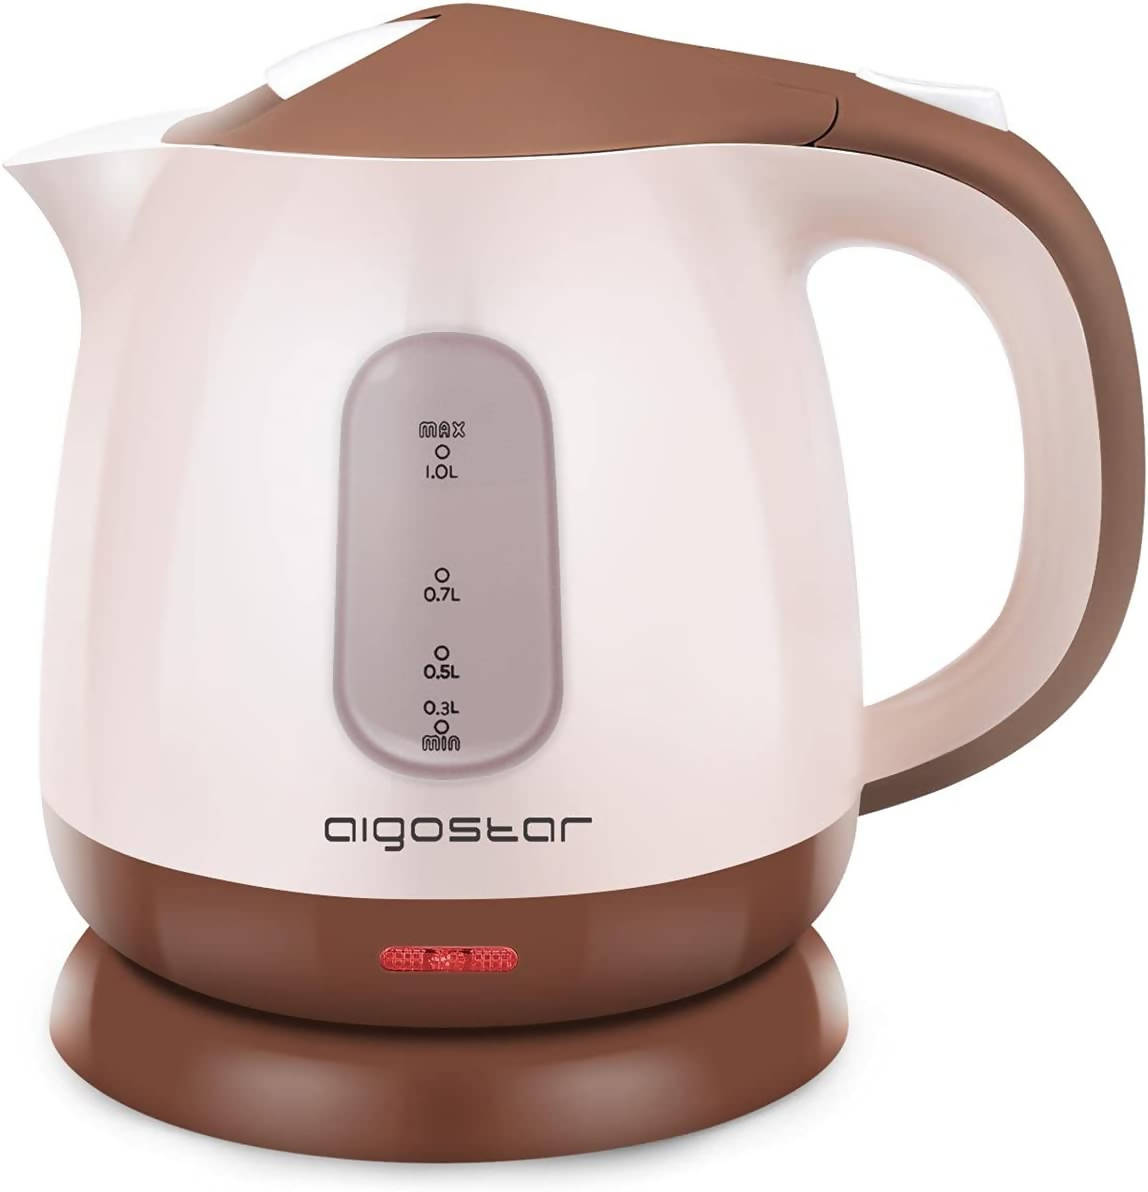 Aigostar Romeo 30HIP Kettle 1100 Watt, 1 Litre Compact Boiler, Automatic Shut-Off with Dry Protection, BPA-Free, Brown Disposable packaging.